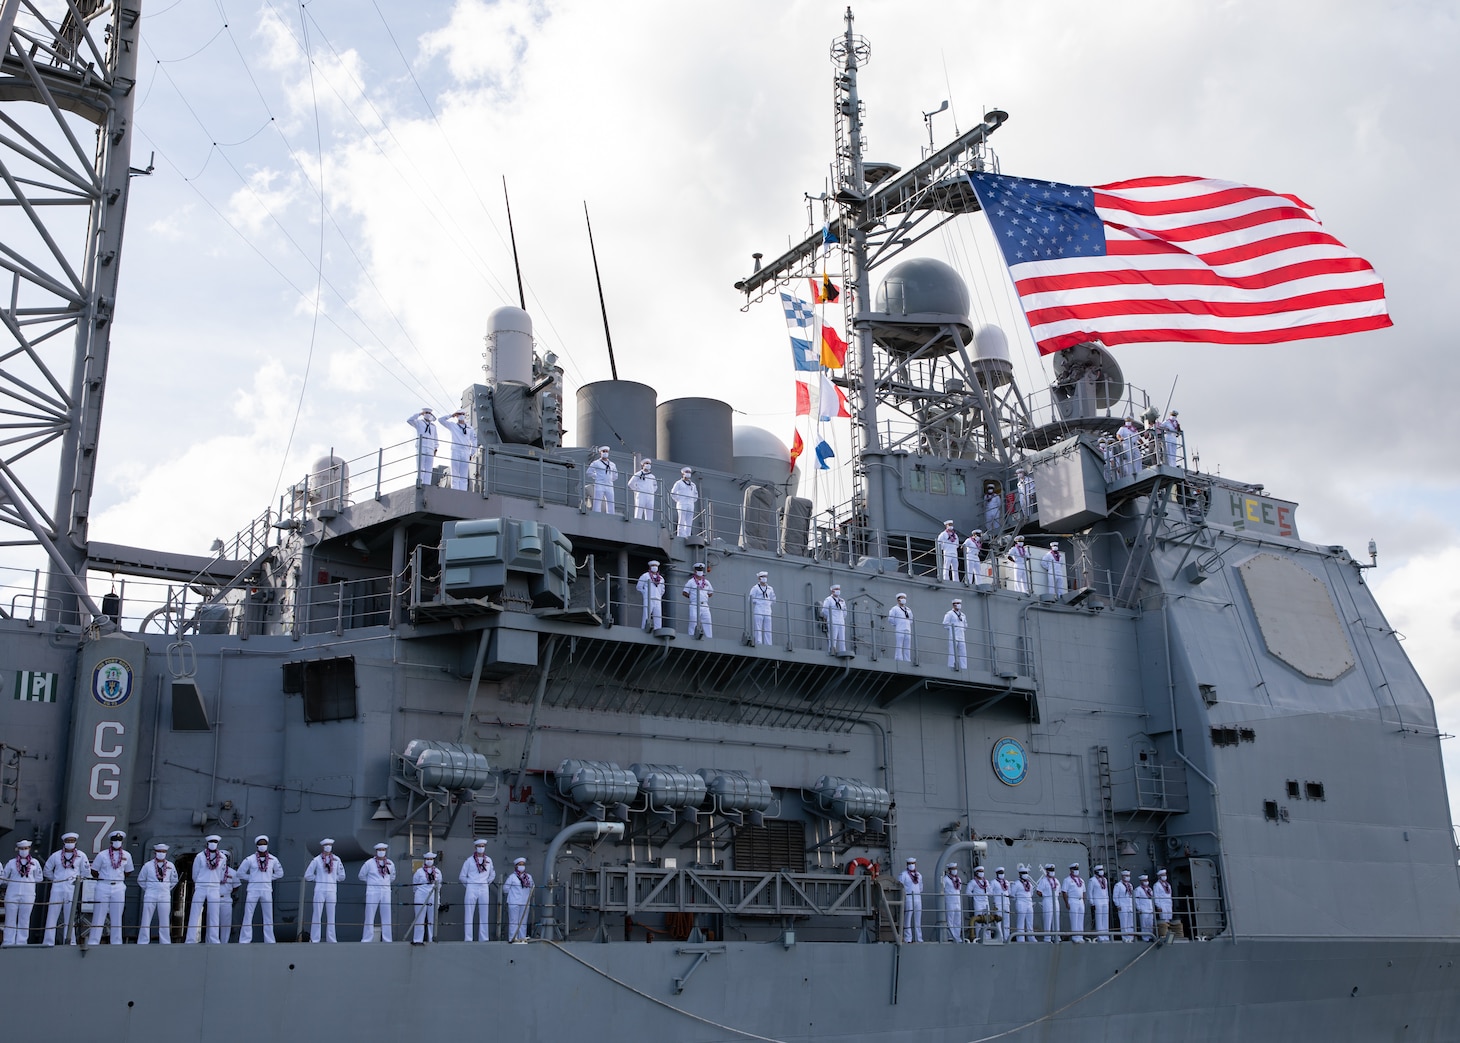 Ticonderoga-class guided missile cruiser USS Port Royal (CG 73) return to Joint Base Pearl Harbor - Hickam from deployment, April 27.